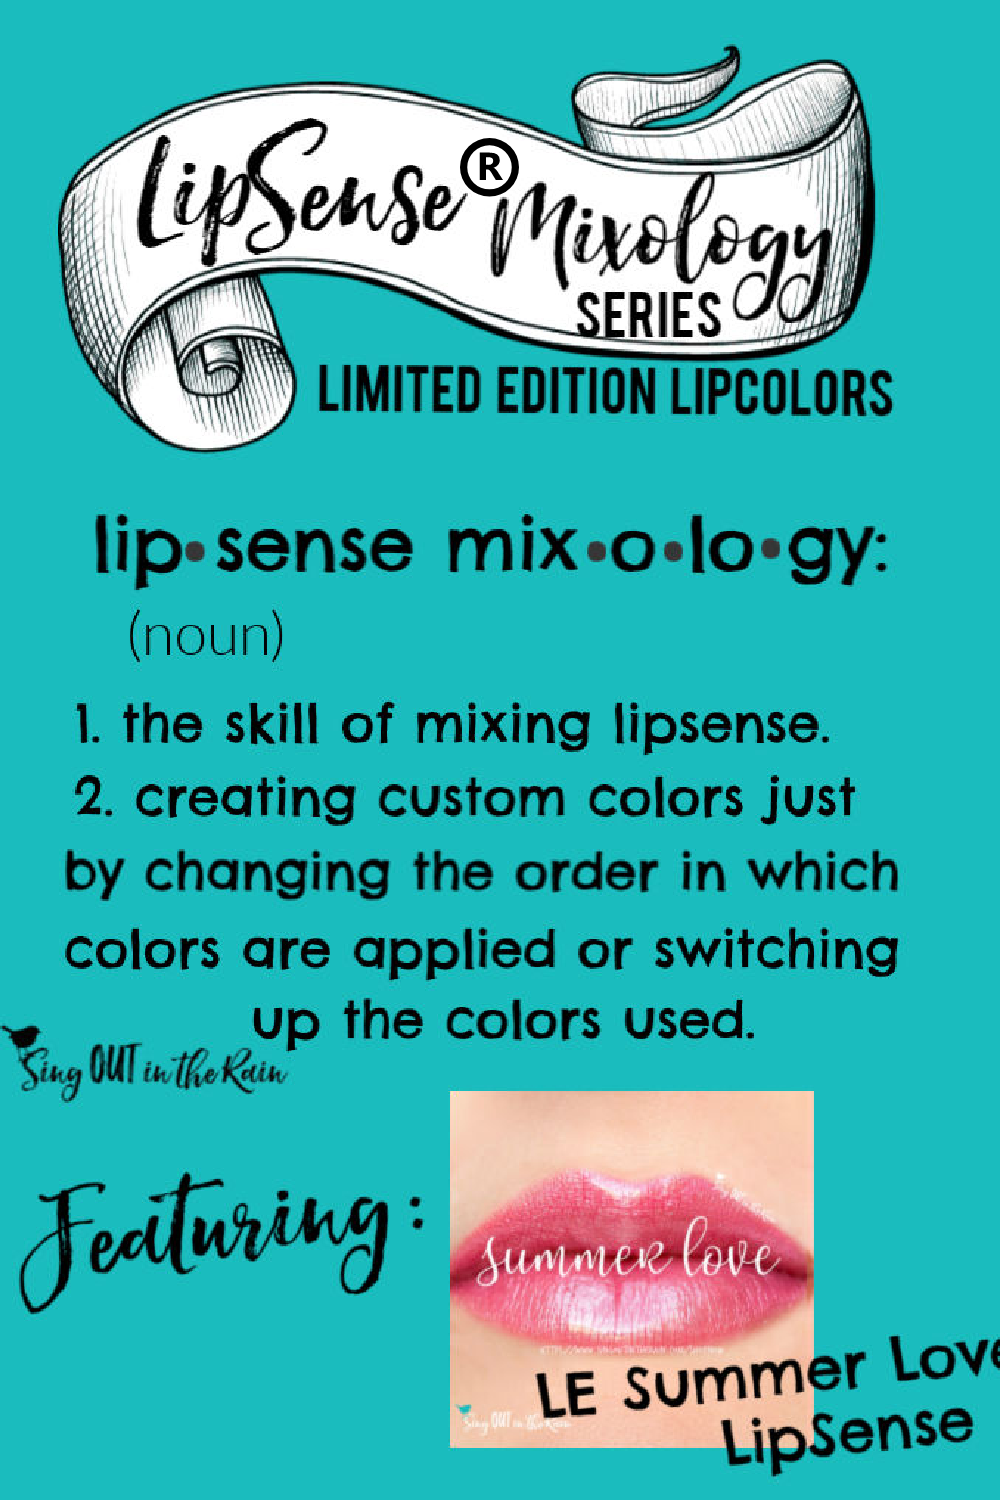 The Ultimate Guide to Summer Love LipSense Mixology